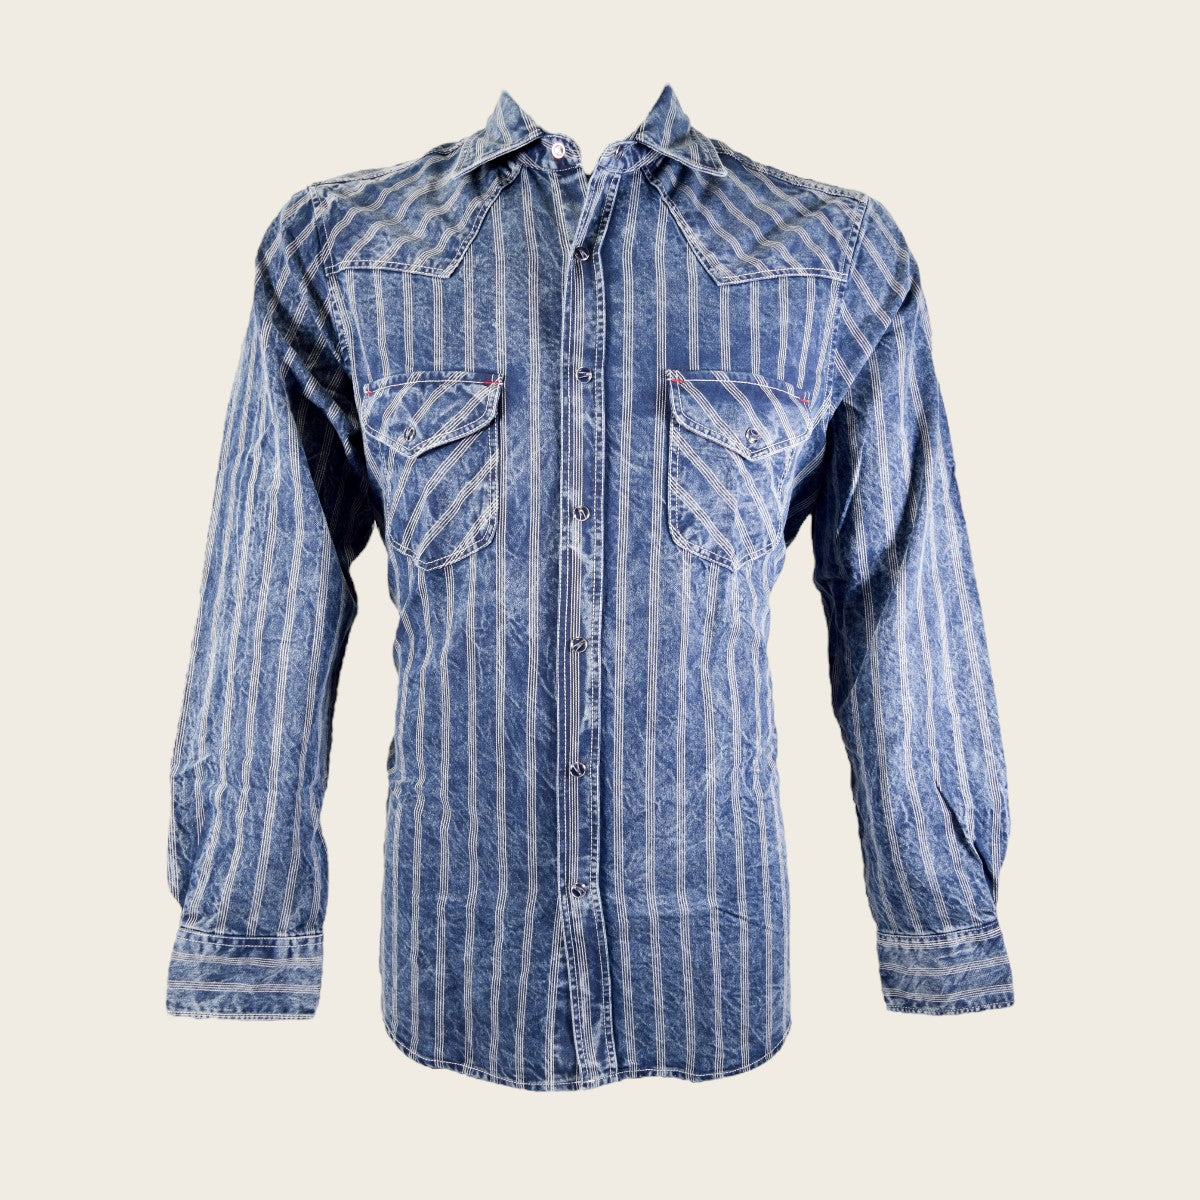 Blue shirt for men made in demin with Stripes